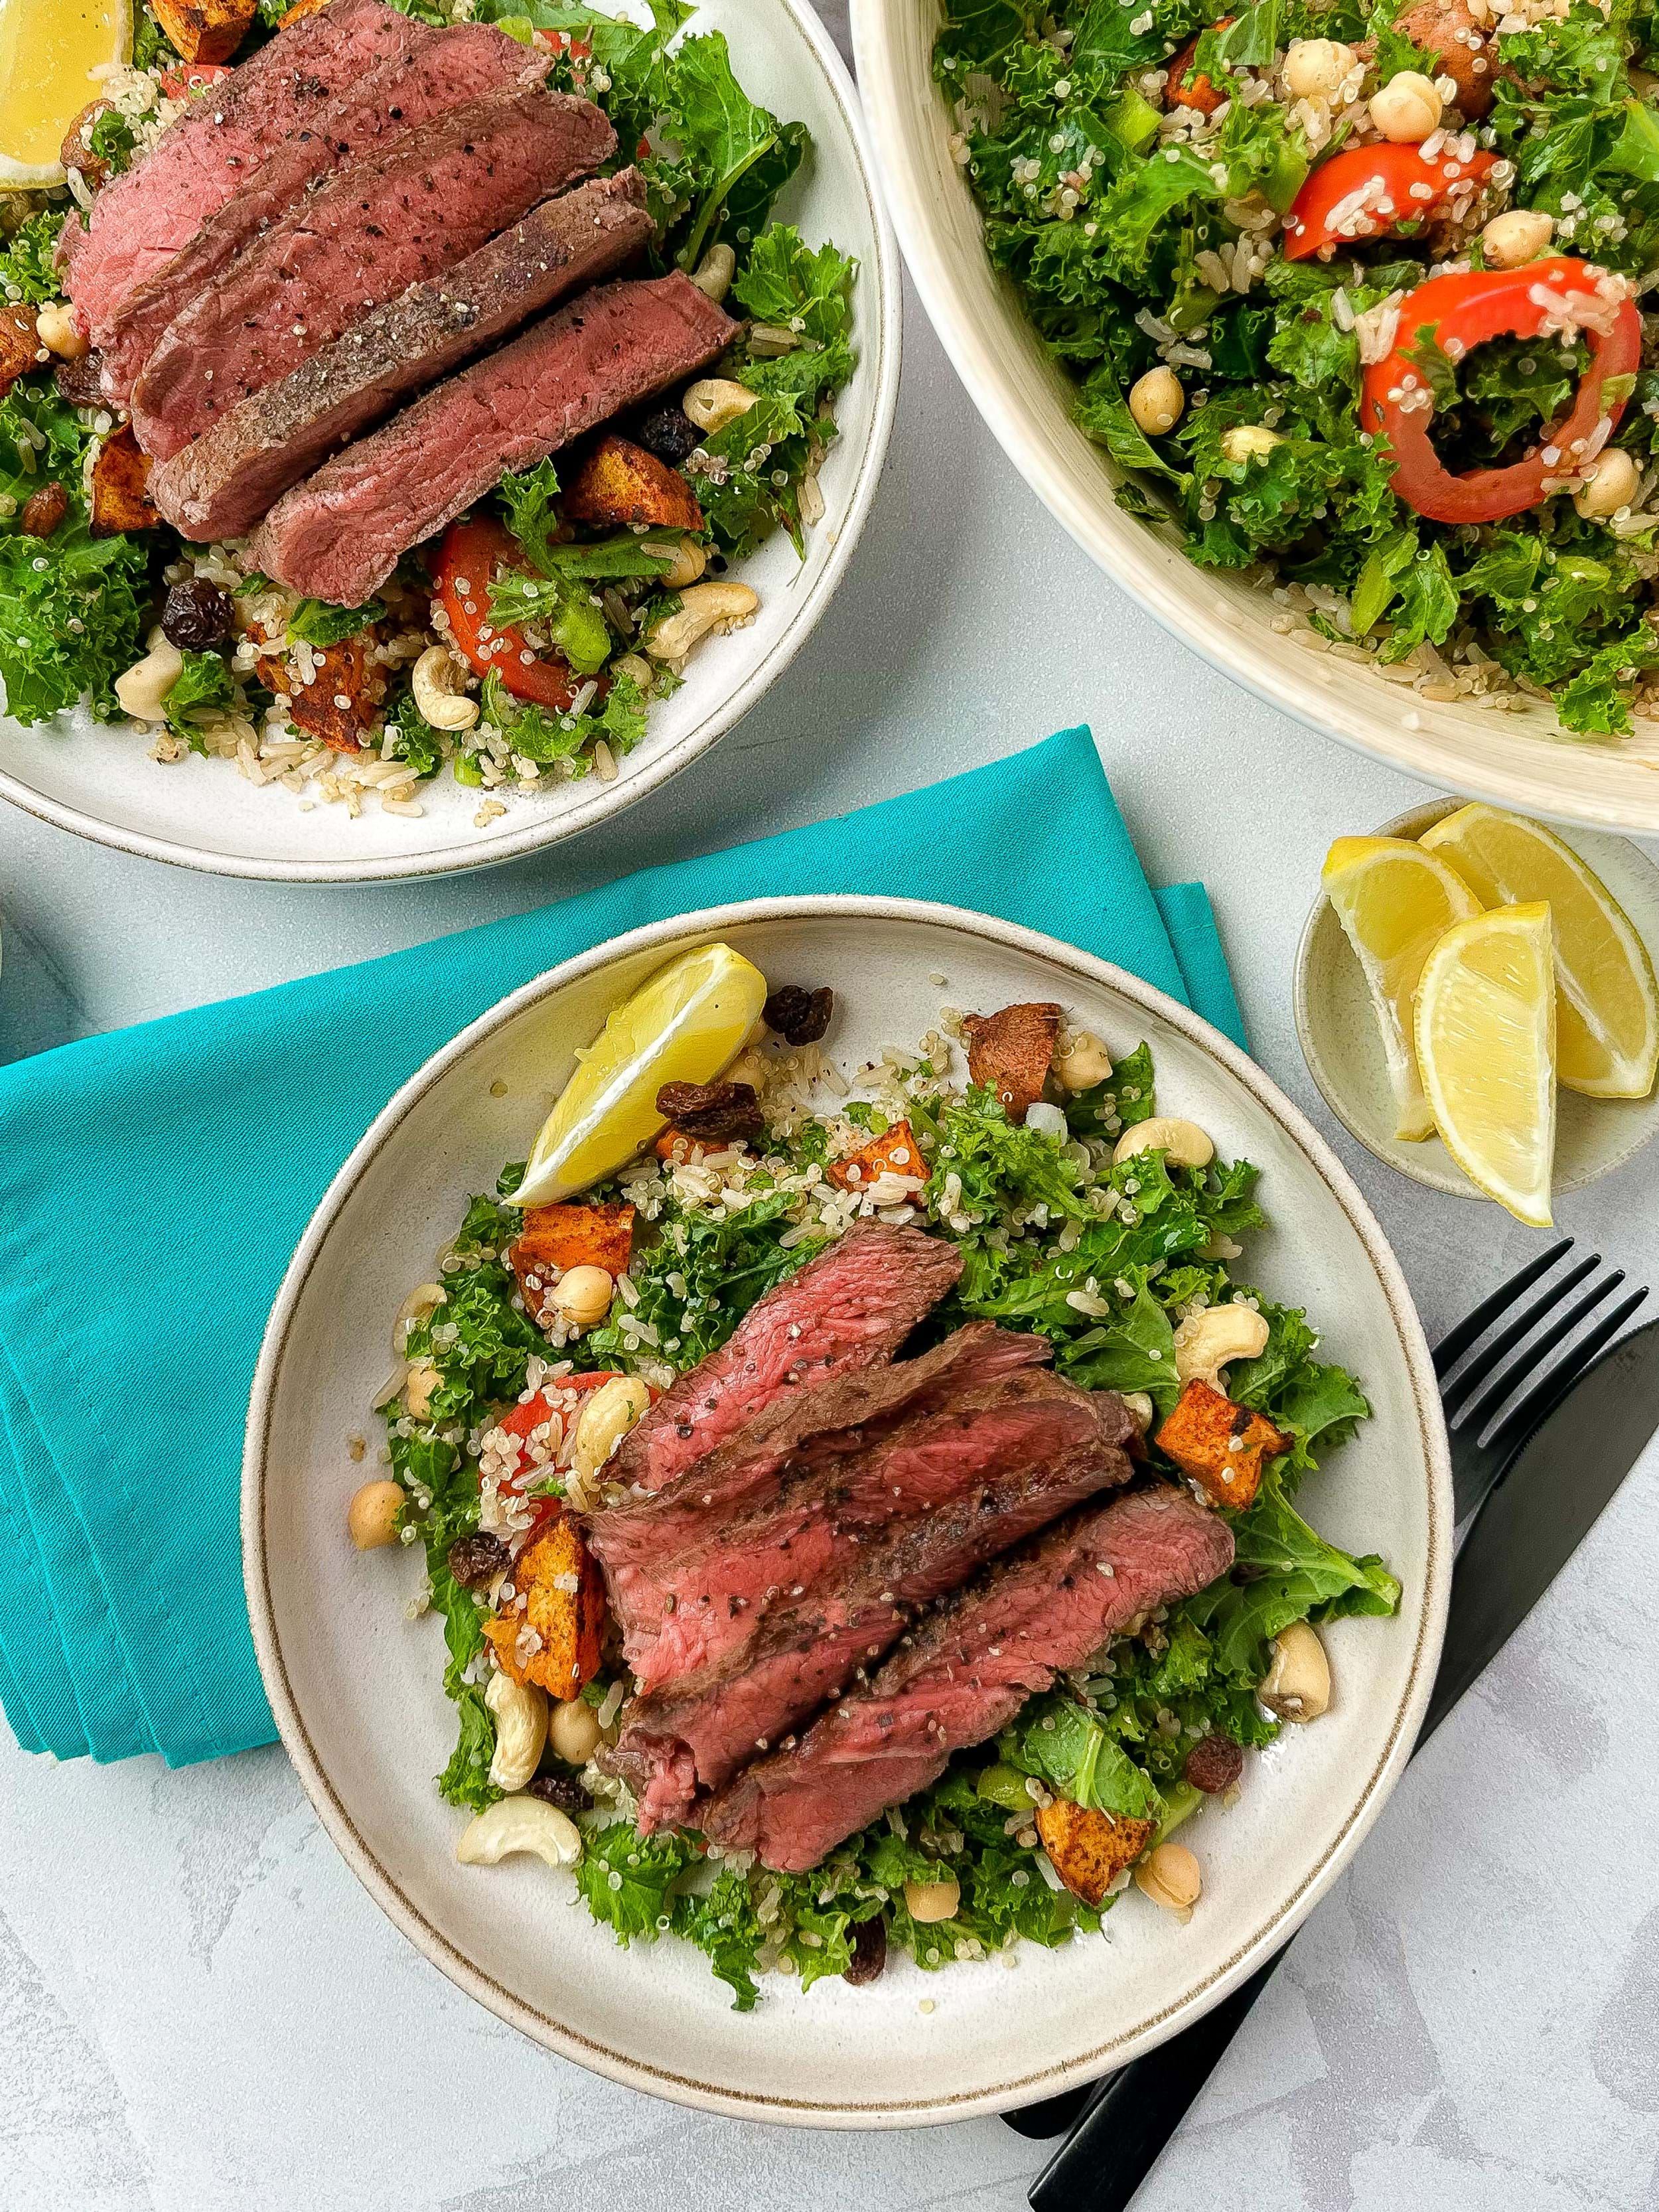 Moroccan Style Steak And Salad 